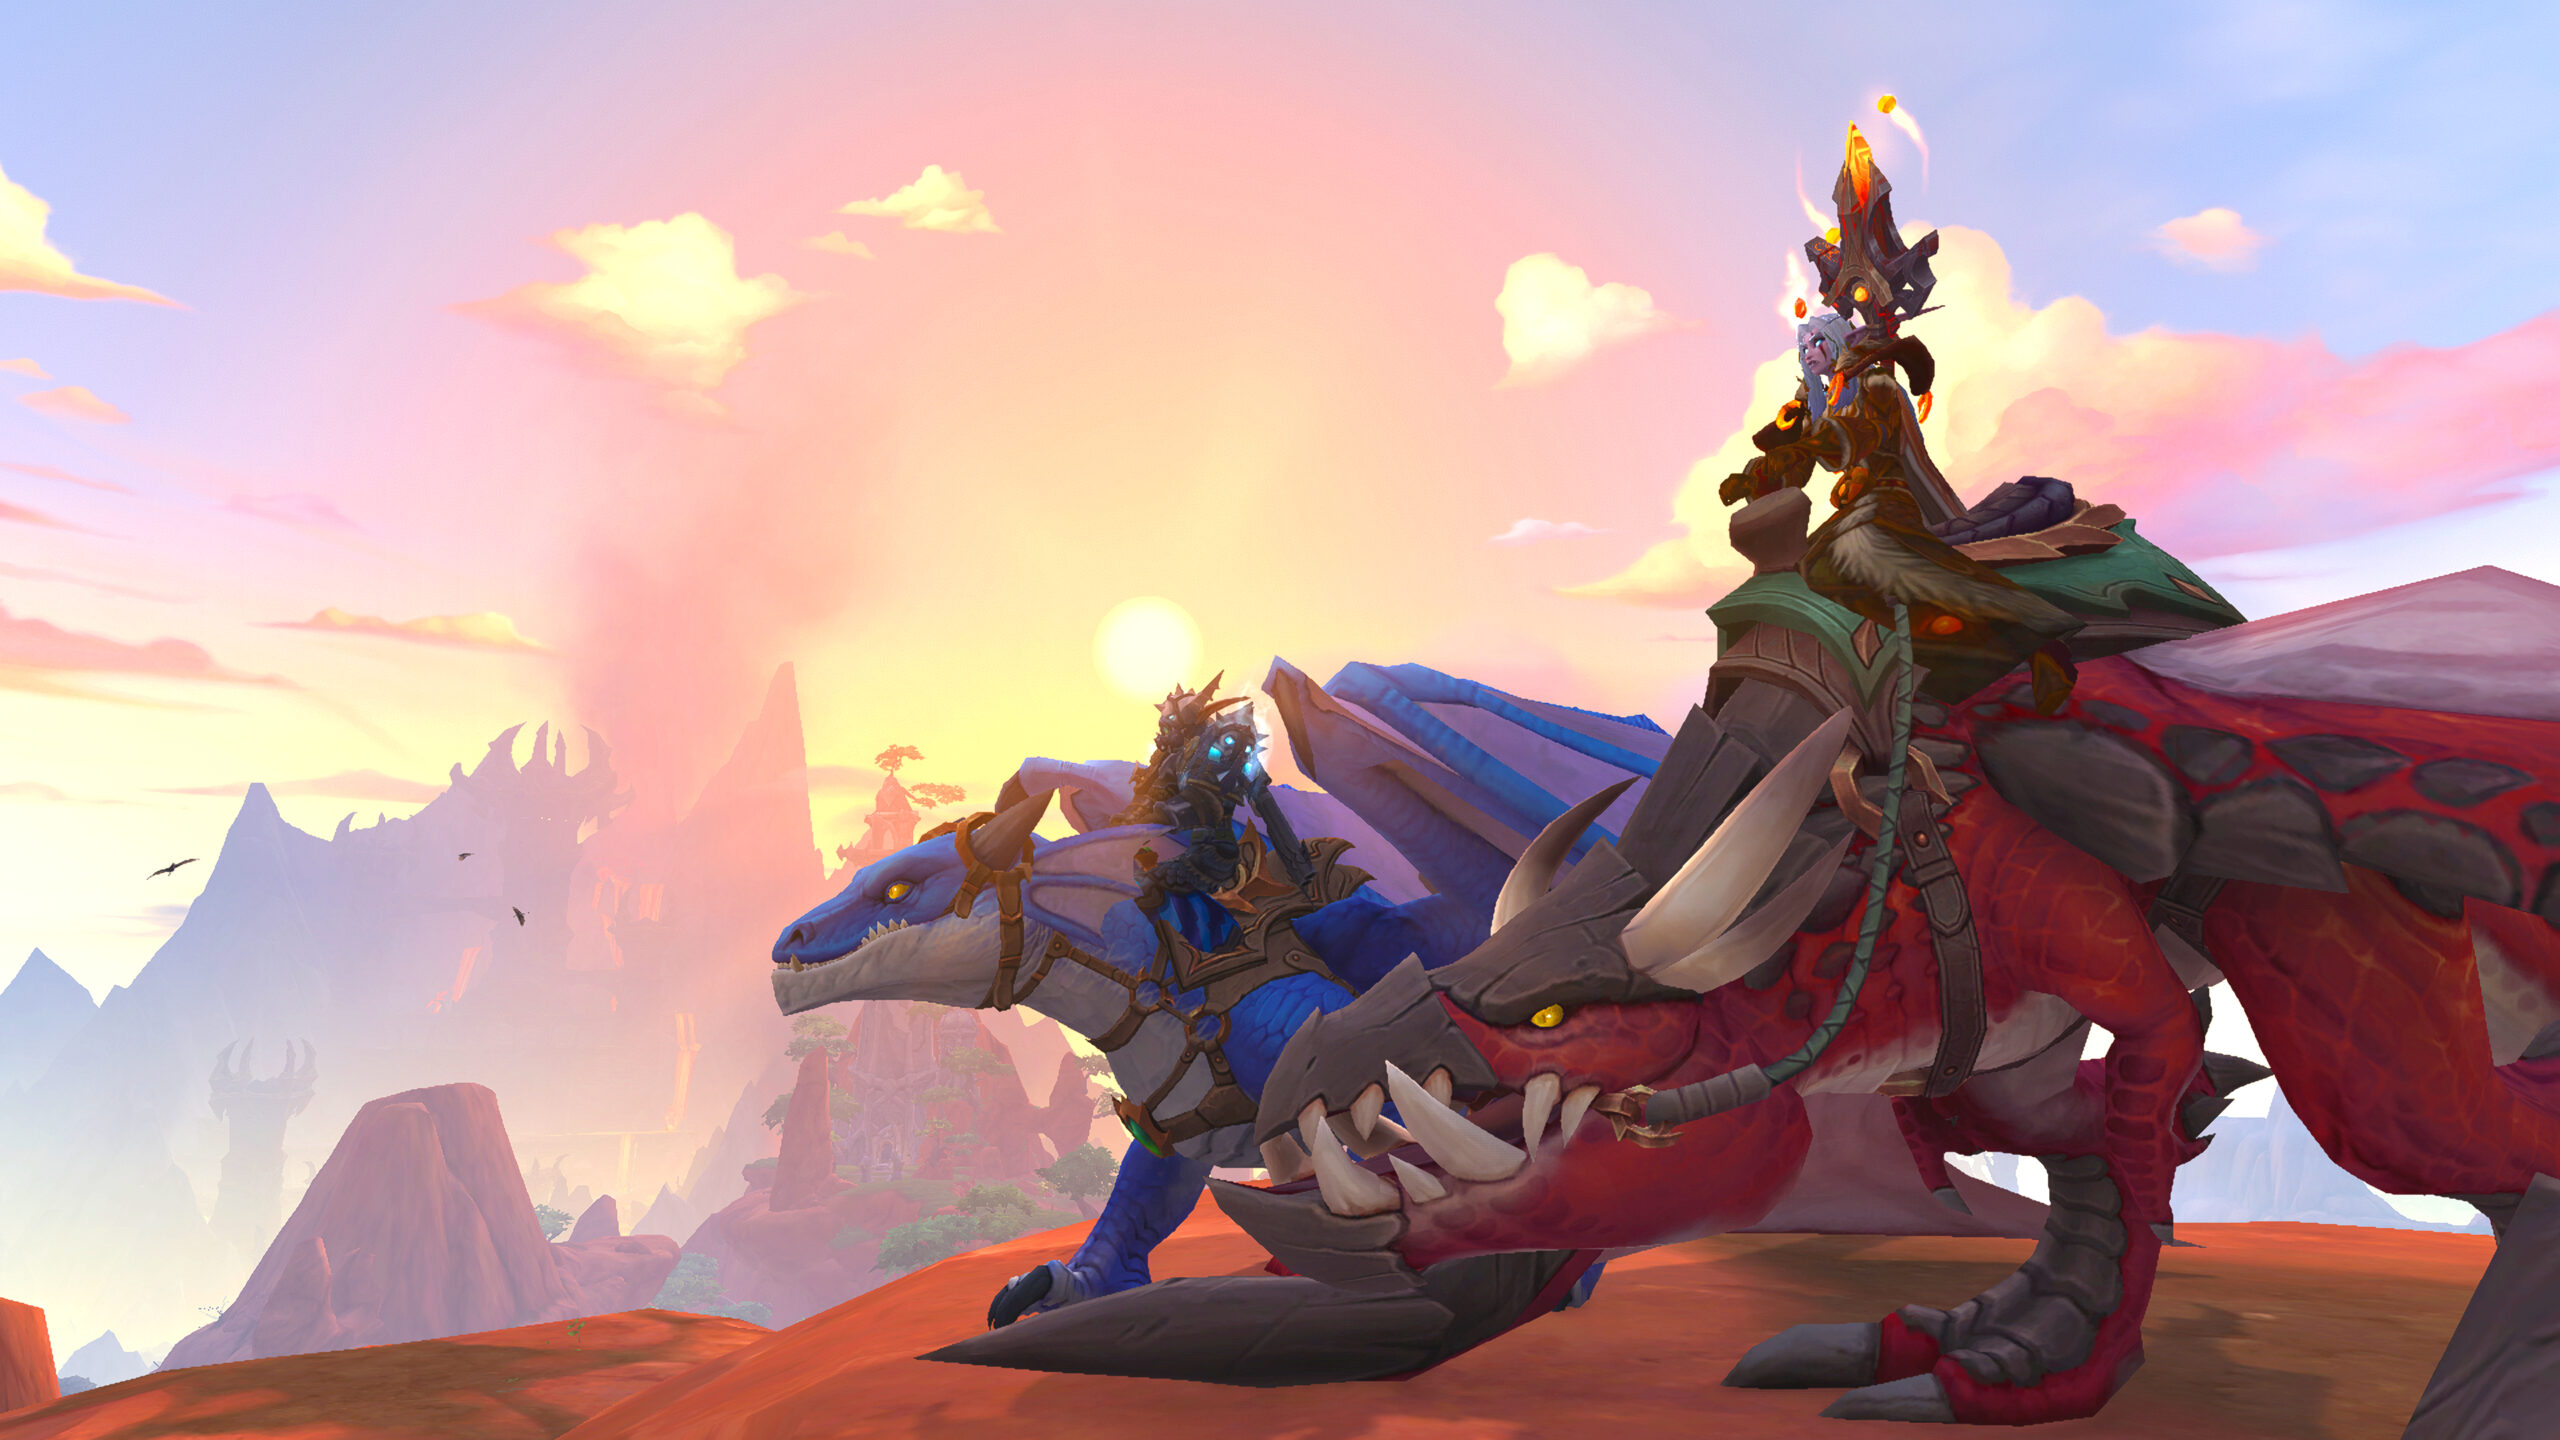 WoW: Welcome to the Danger Zone!  Dragon Riding PvP in the style of Top Gun!